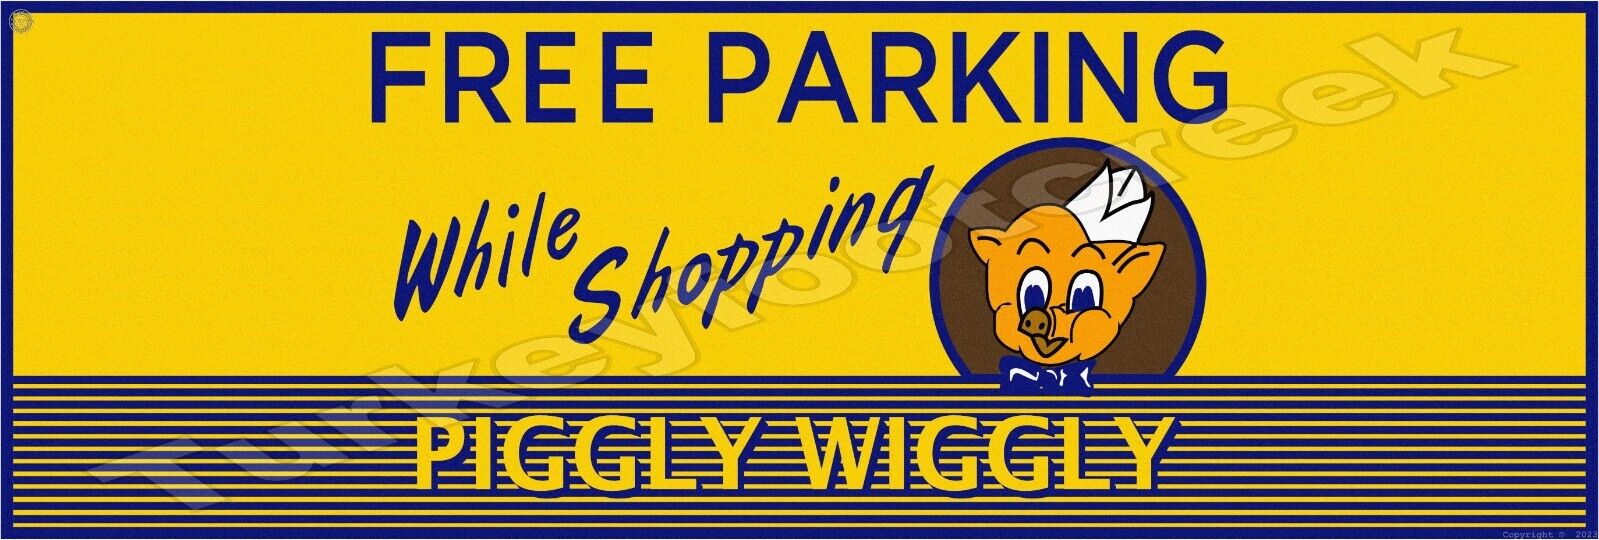 Piggly Wiggly Free Parking 6